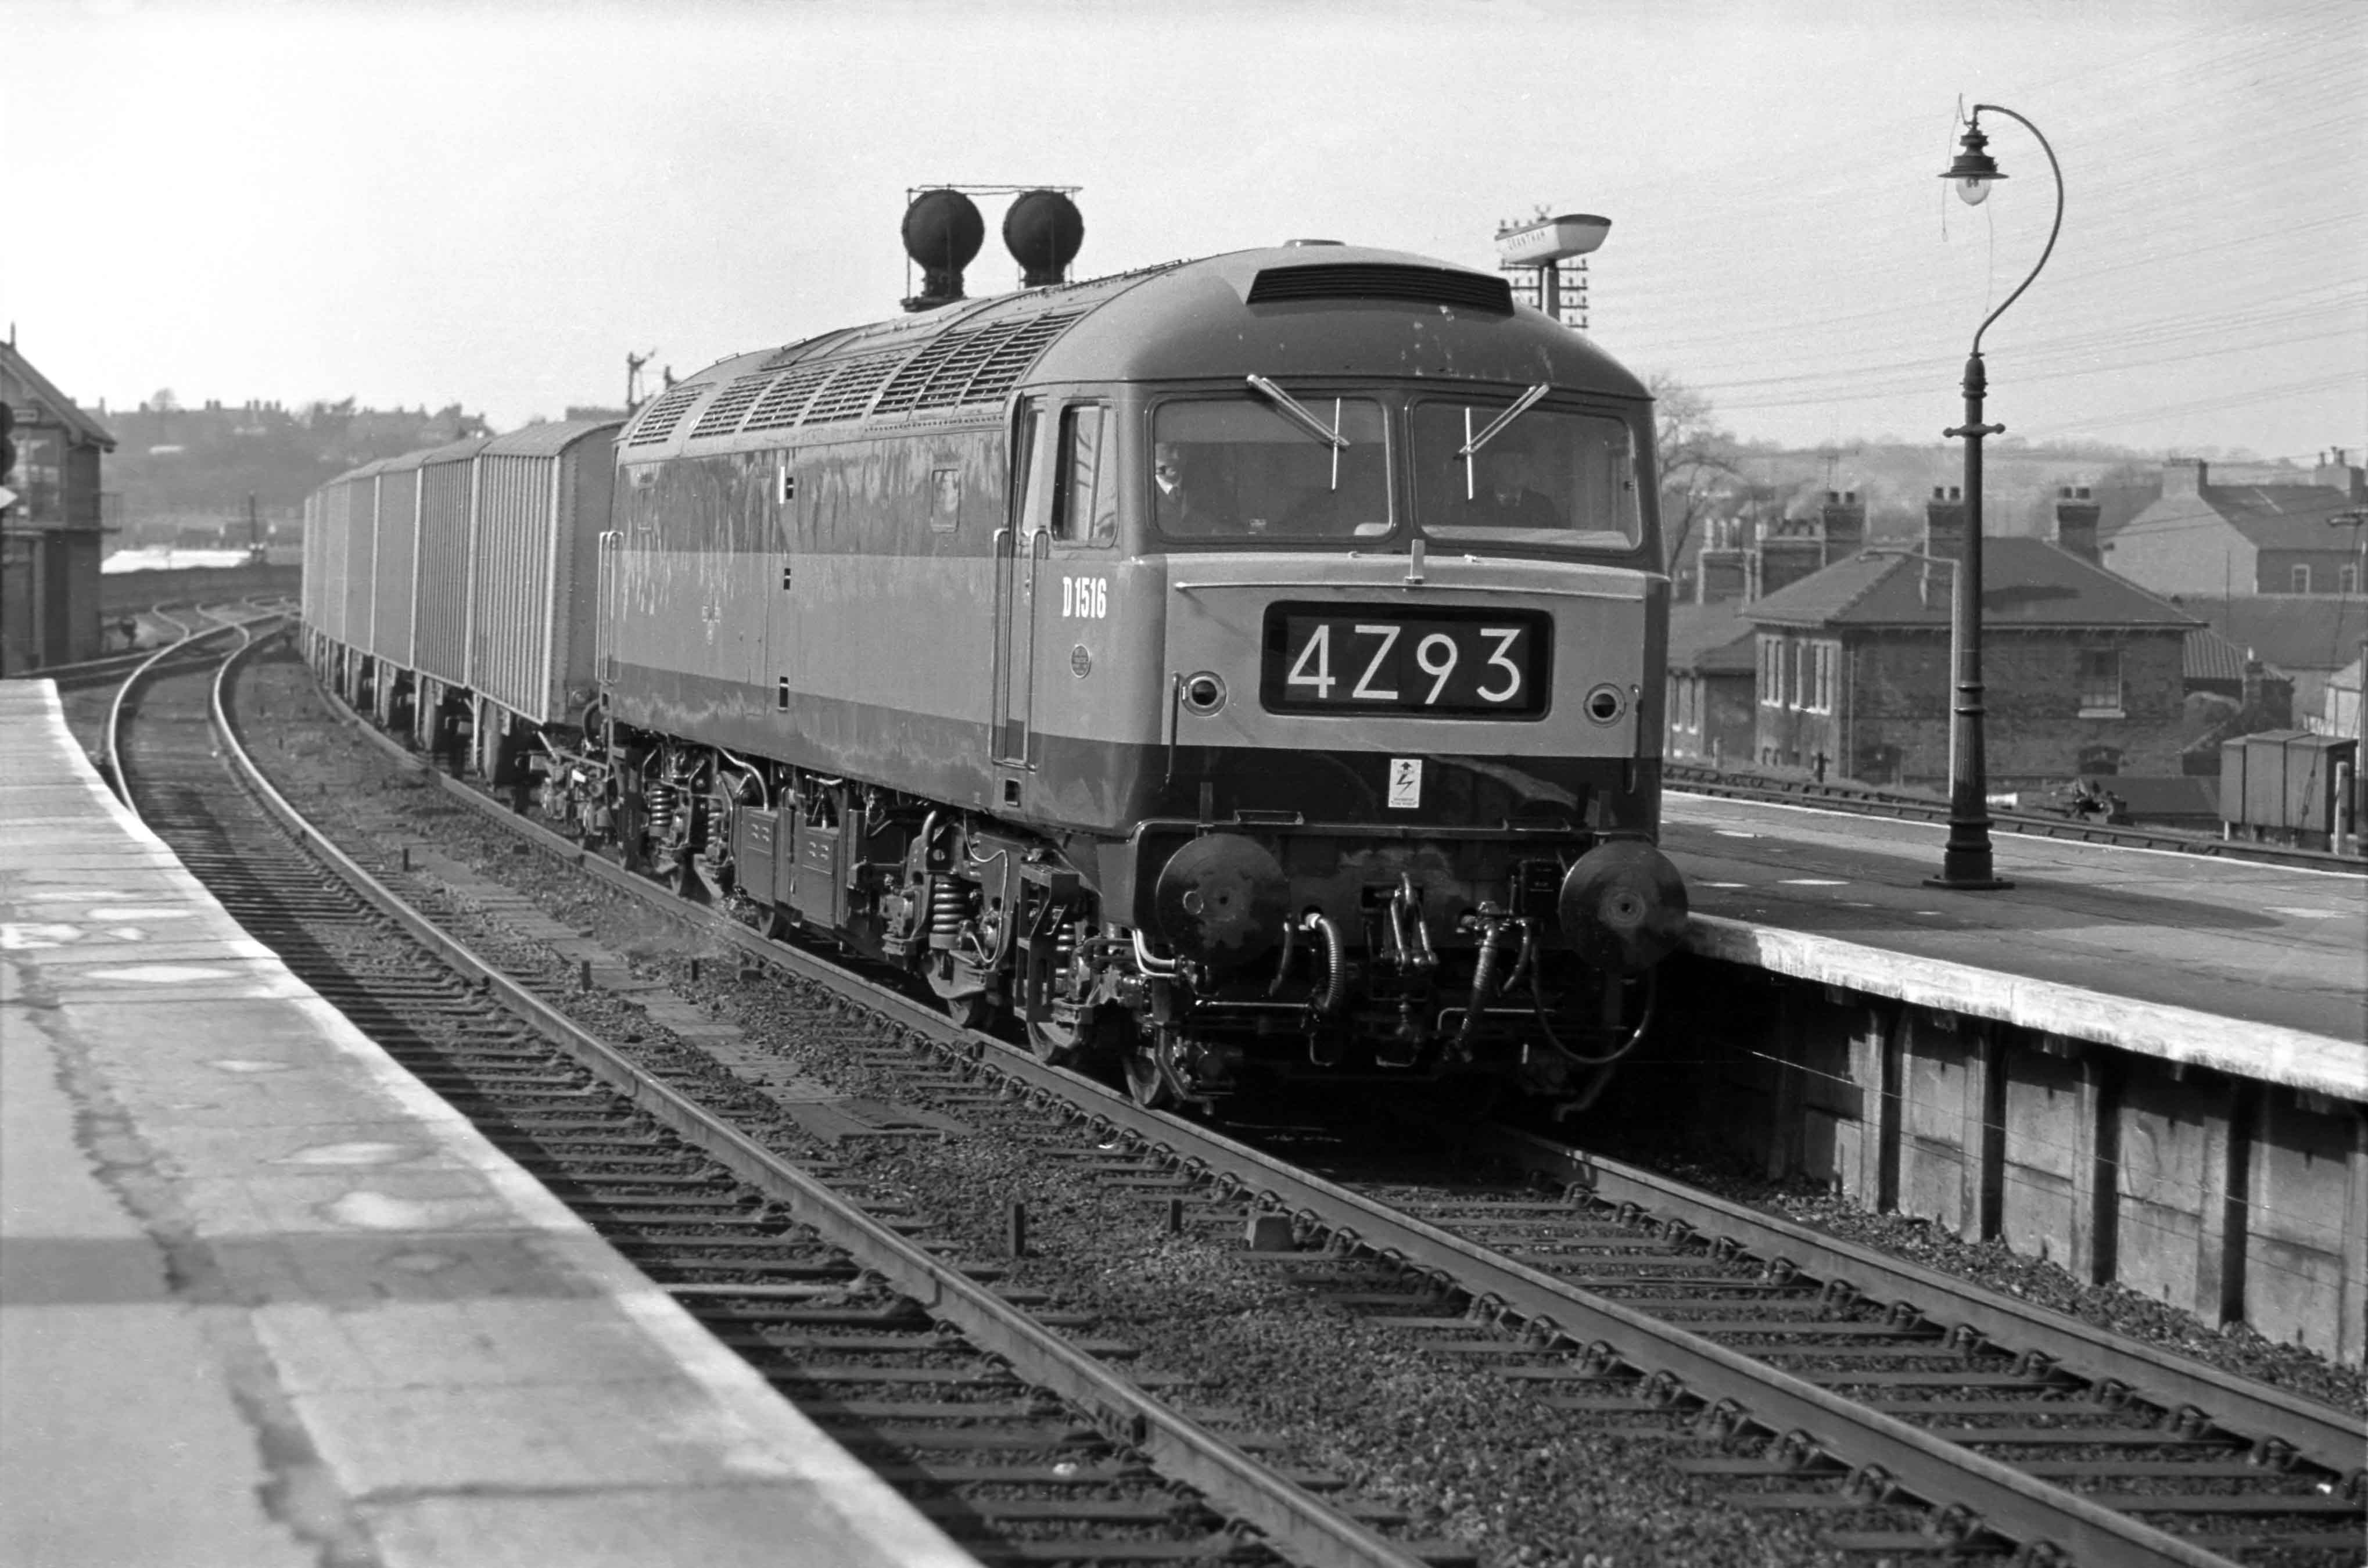 This southbound Class 4 express freight is headed by Brush Type 4 locomotive No. D1516 on 18th April 1963. The locomotive was practically brand new when this picture was taken, having entered traffic on 10th April. It was one of the pilot order for 20 locomotives (D1500 to D1519) of a class of which eventually more than 500 examples were built. Amazingly D1516 still exists, being preserved at the Midland Railway Centre, Butterley in Derbyshire by The 47401 Project / 47401 Diesel Locomotive Ltd. (see http://www.47401project.co.uk/). Photograph by Cedric A. Clayson, © John Clayson